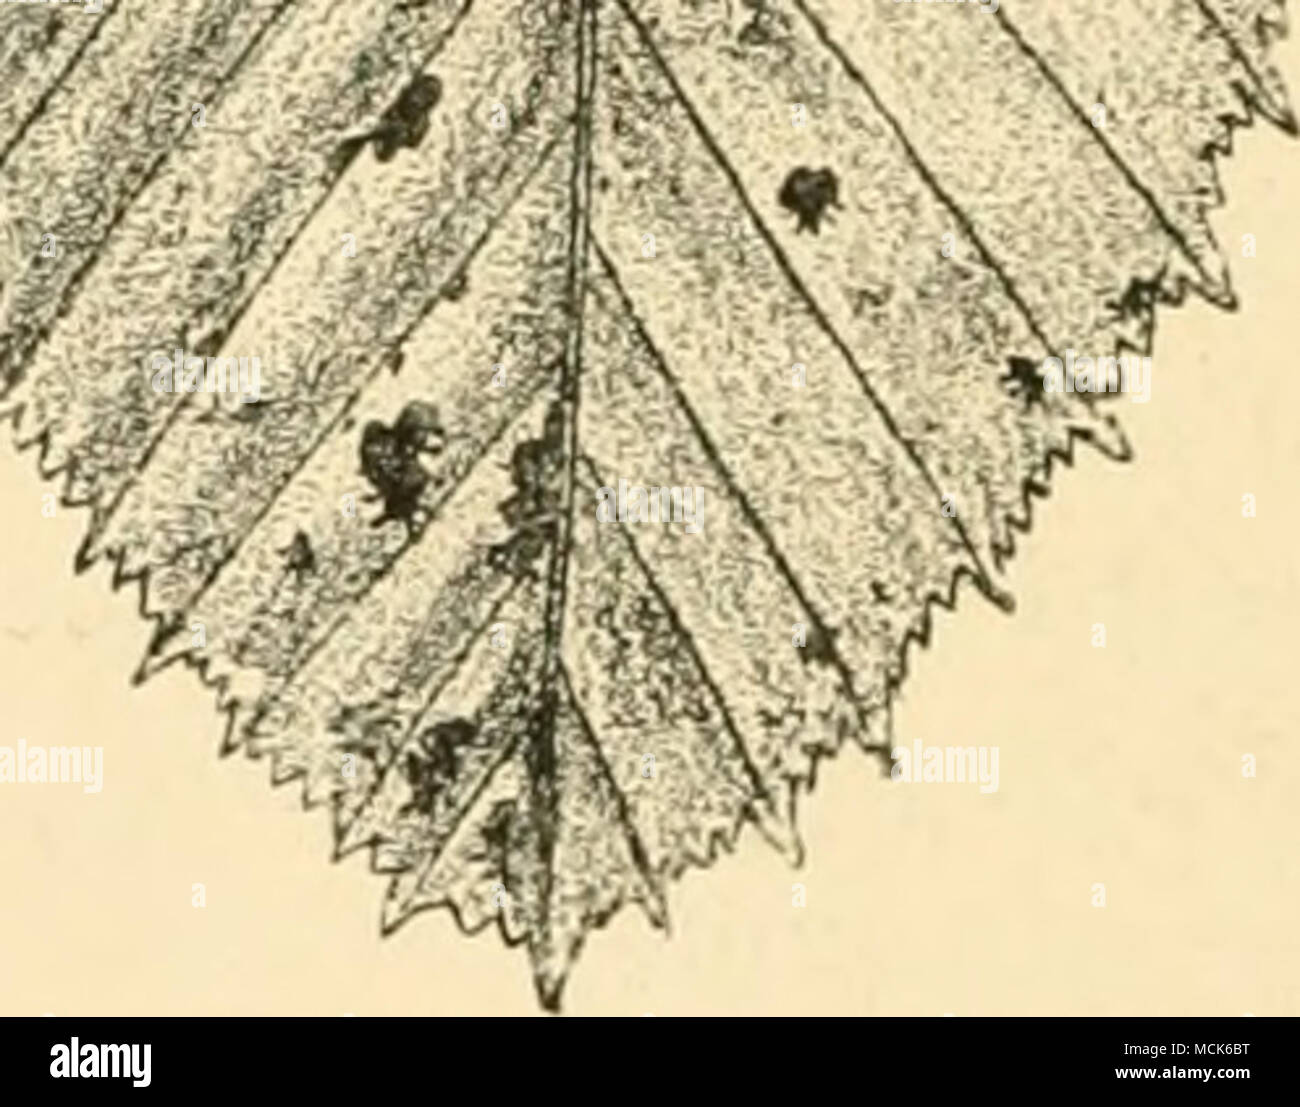 . Fio. lOS.—Mamiana fimhriala on Carpinus Setv.lv.s. Leaf of Hornbeam seen on lower surface. Stroma (enlarged), with the long black necks of the perithecia projecting from the ruptured leaf-epidermis, (v. Tubeuf del.) Valsa. A stroma is generally present, but is of very variable appear- ance ; embedded in it are the perithecia, with only their beak- like mouths projecting. The spores are hyaline or light-brown, unicellular, and generally bent. No paraphyses are present. Valsa oxystoma liehm.&quot; This causes disease and death of branches of Alnus viridis in the Alps. The symptoms are withermg Stock Photo